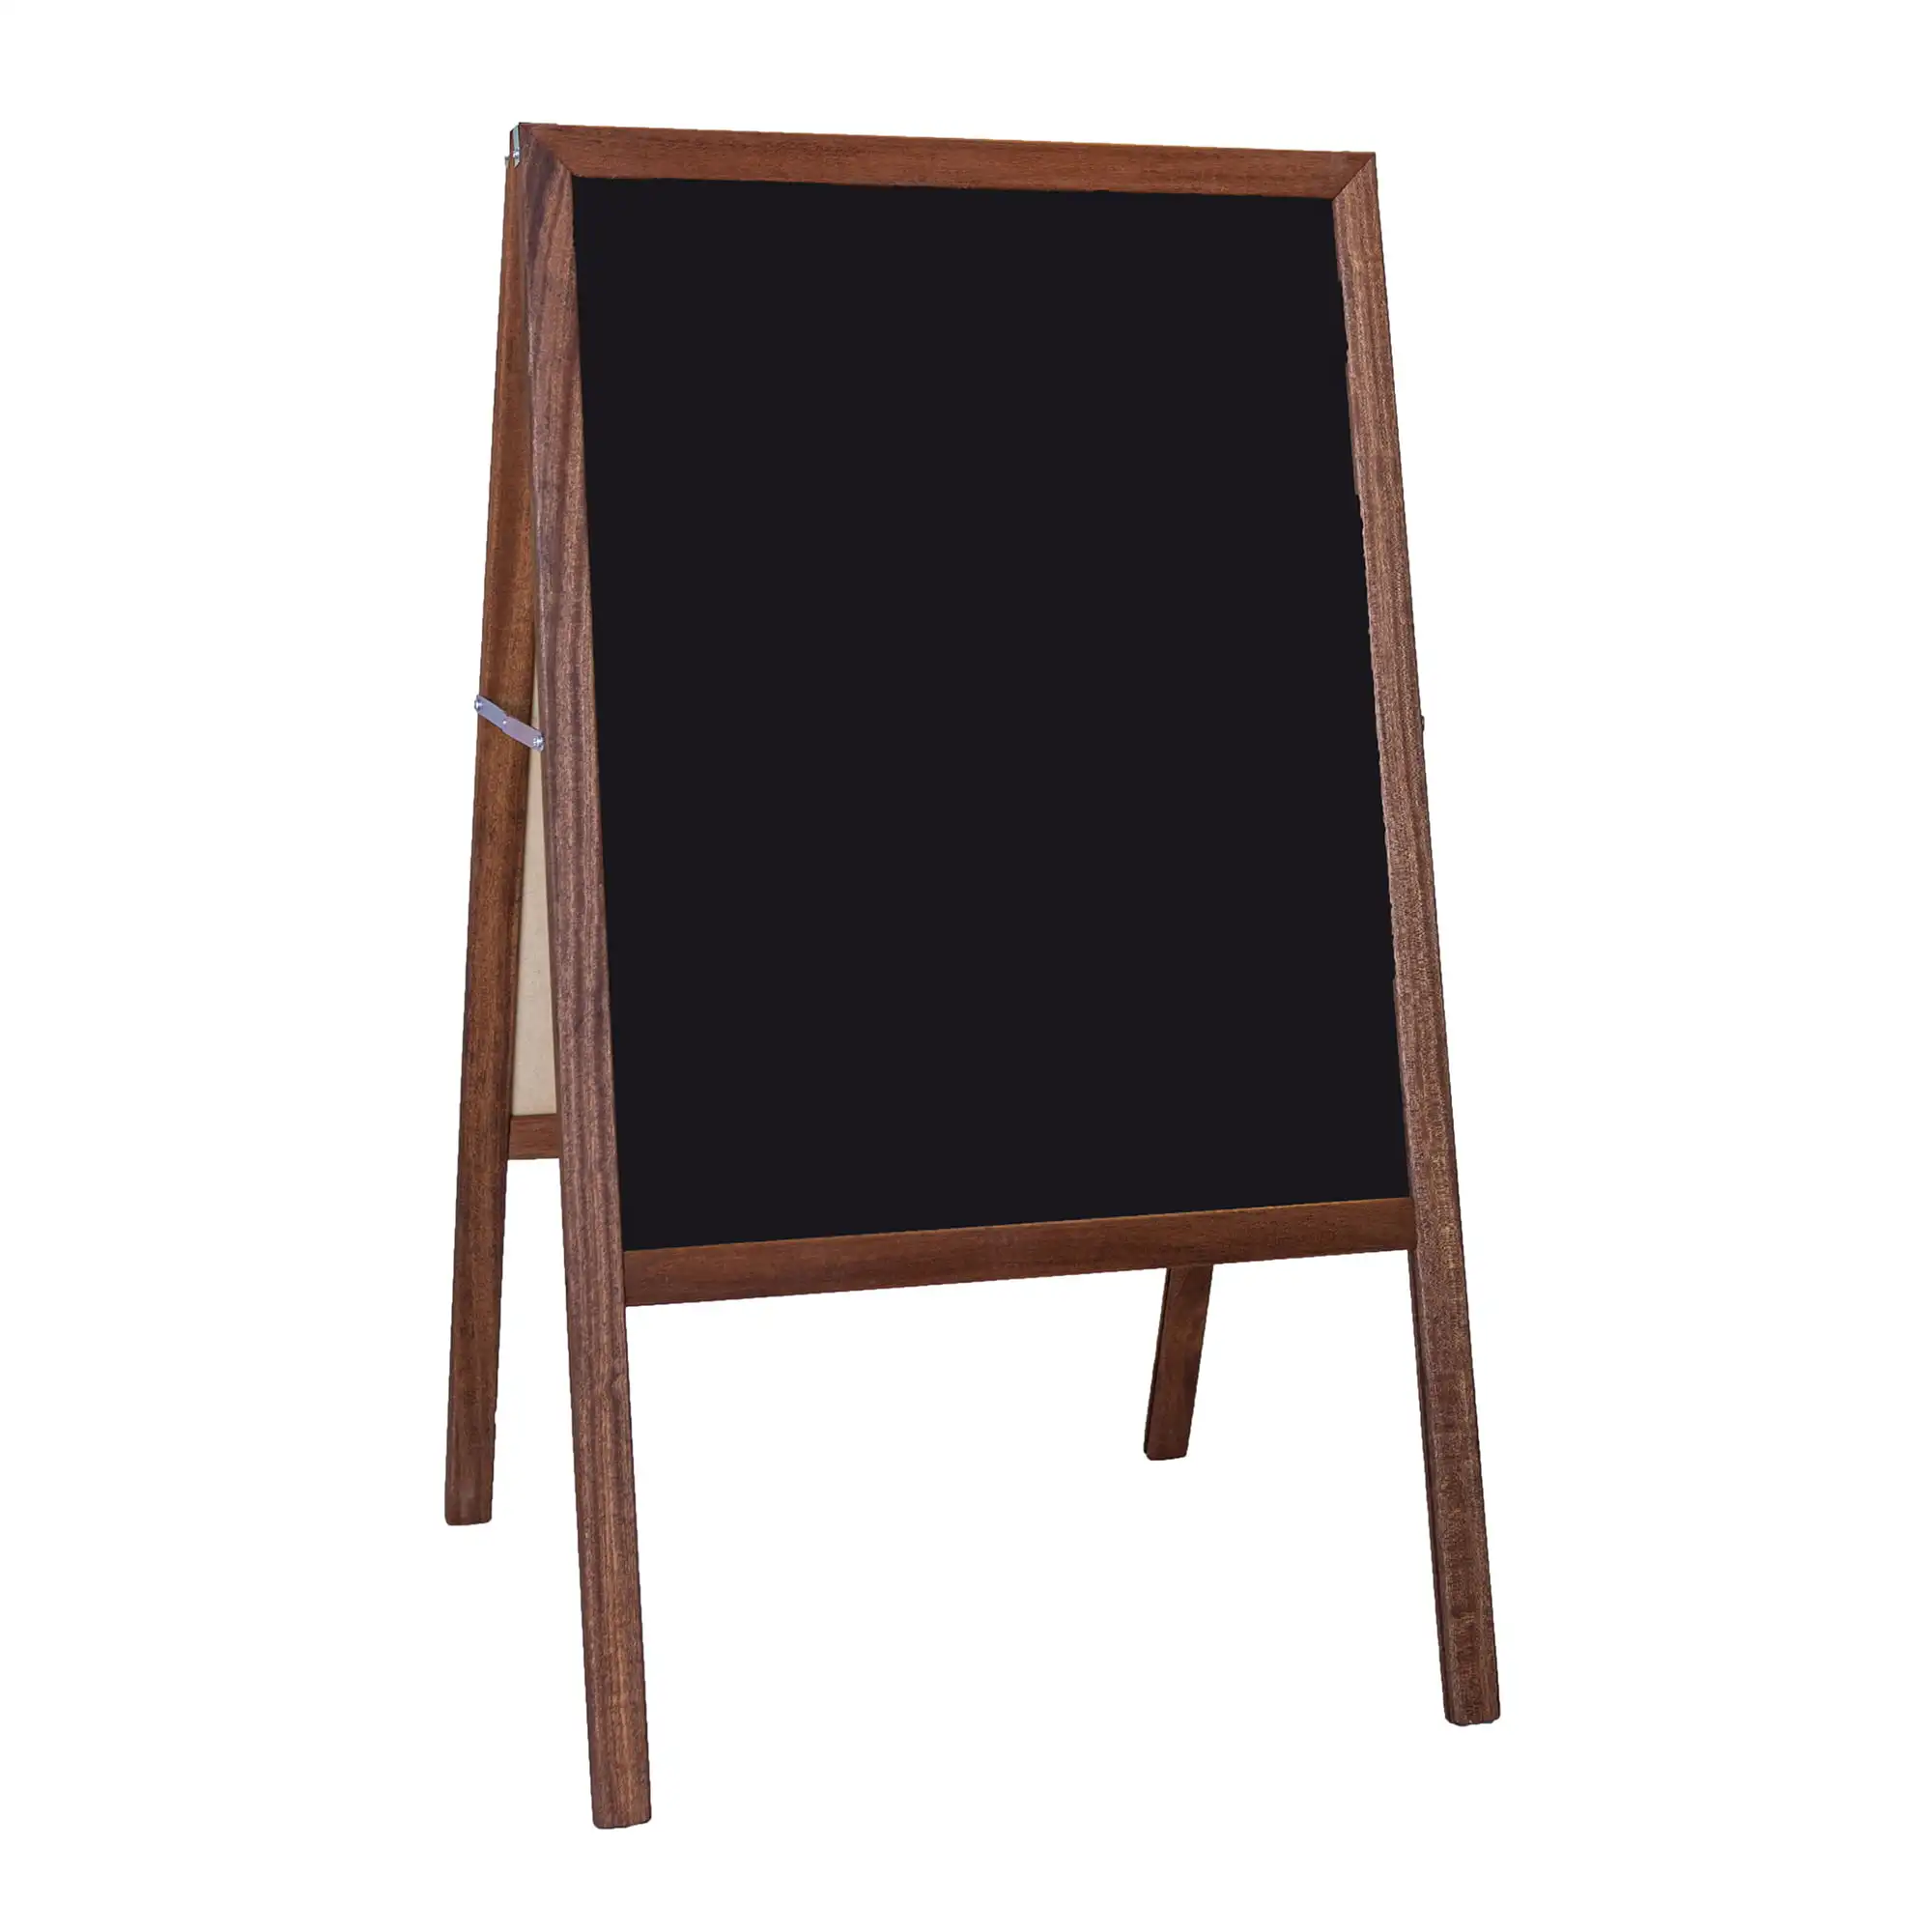 Stained Marquee Easel with Black Chalkboard, 42 Inch H x 24 Inch W